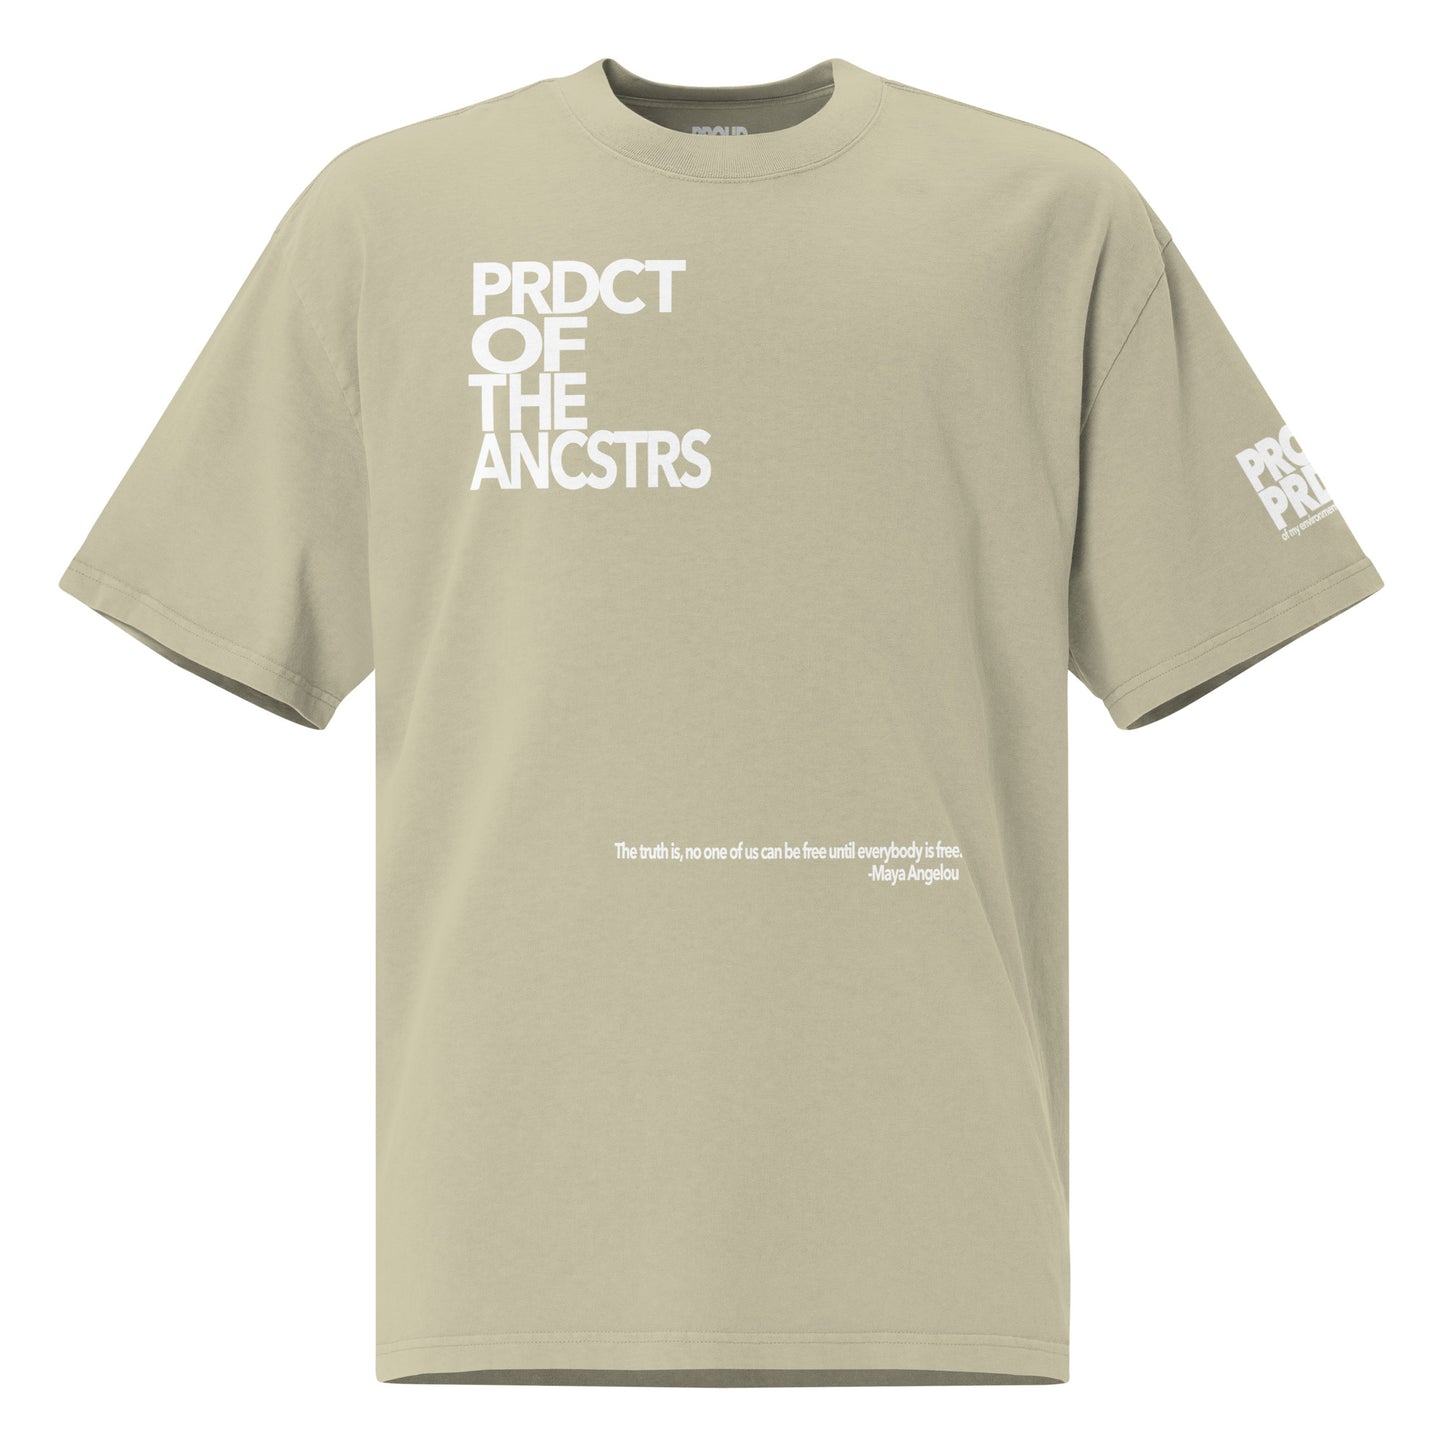 "Product of the Ancestors" Oversized t-shirt